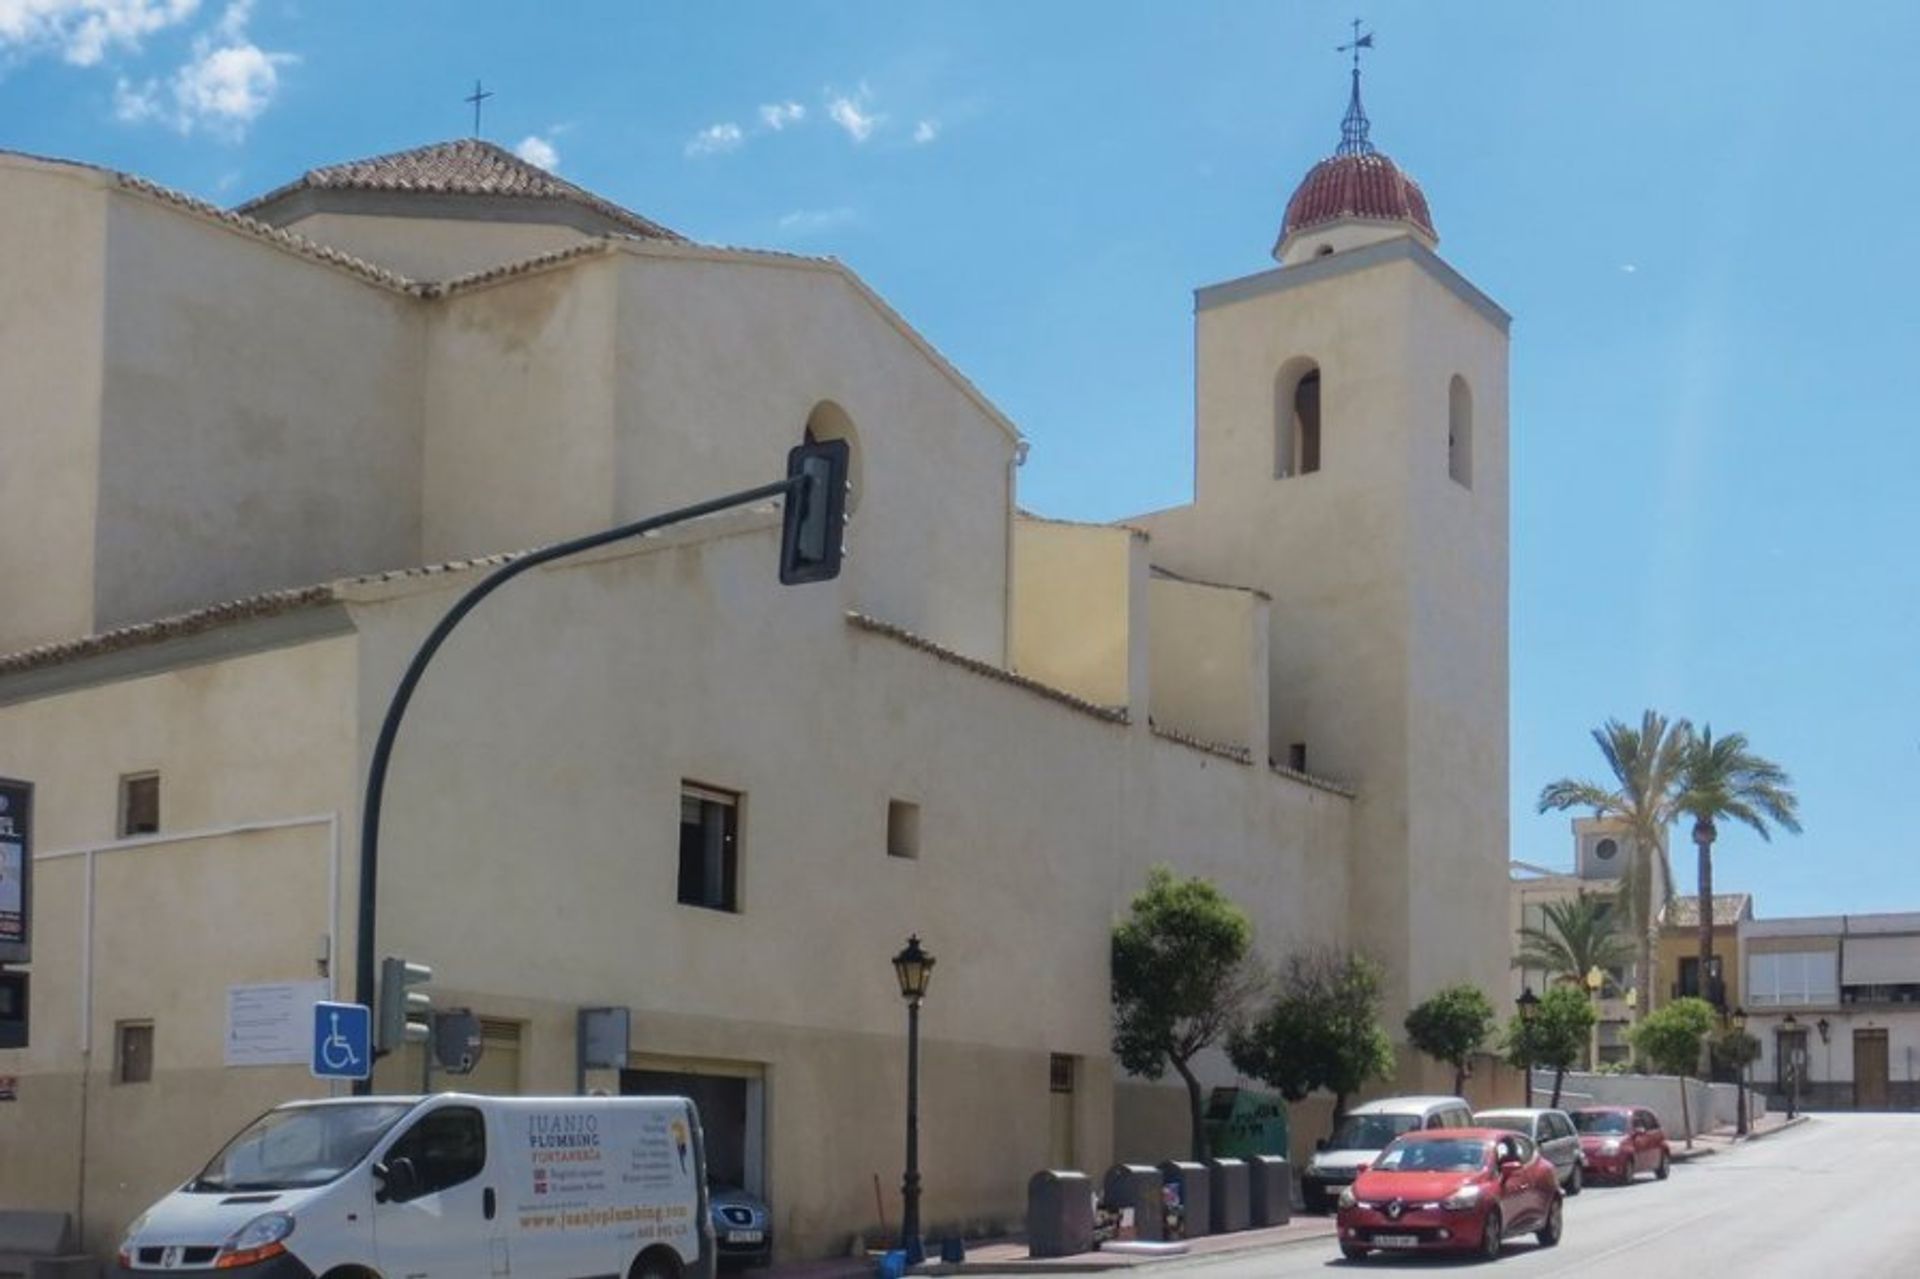 18th century San Miguel Church in the heart of the town offers scenic views of Vega Baja and the sparkling Mediterranean 